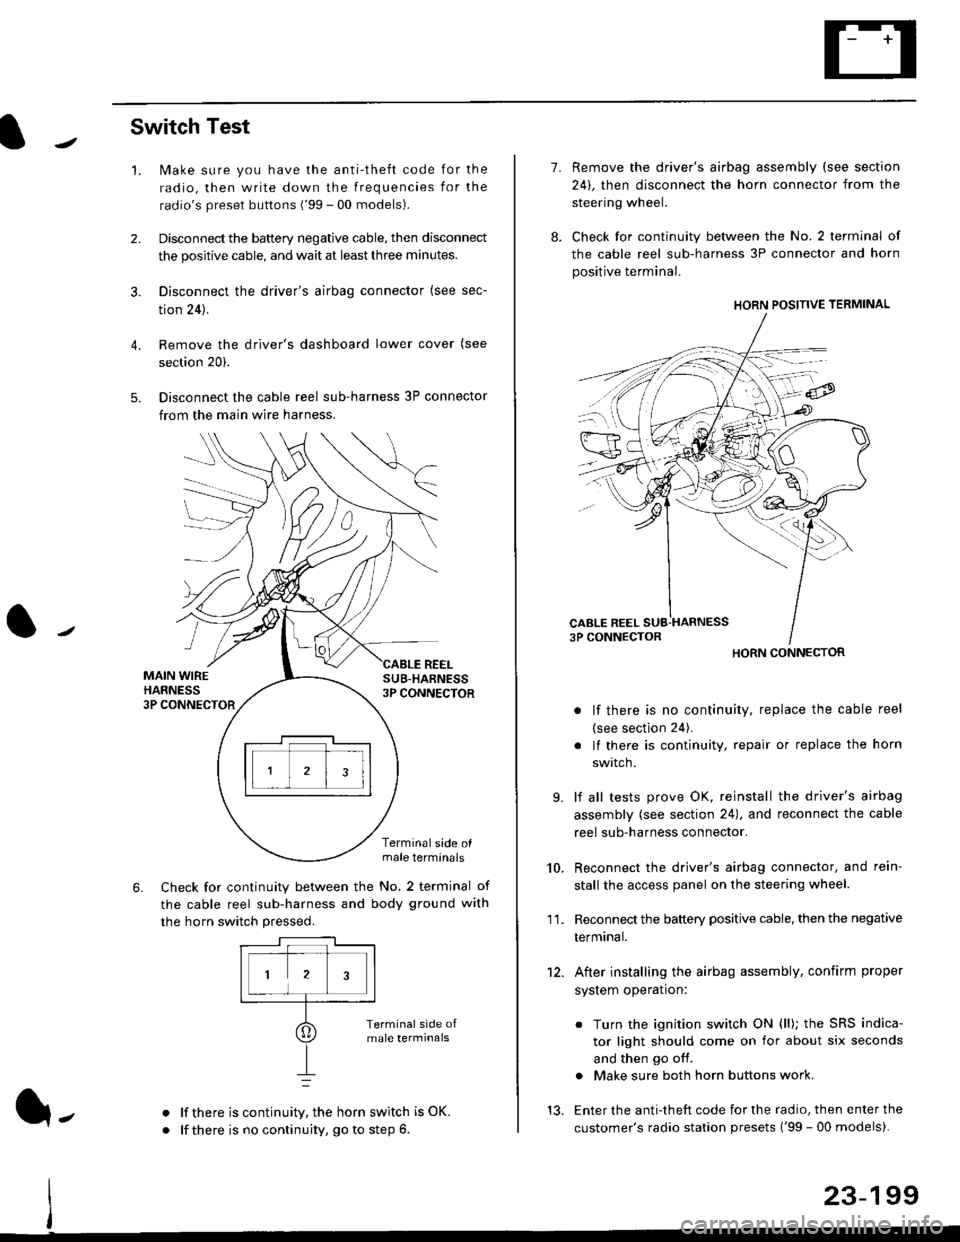 HONDA CIVIC 1996 6.G Repair Manual Switch Test
lMake sure you have the anti-theft code for the
radio, then write down the frequencies for the
radios preset buttons (99 - 00 models).
Disconnect the battery negative cable, then disconn